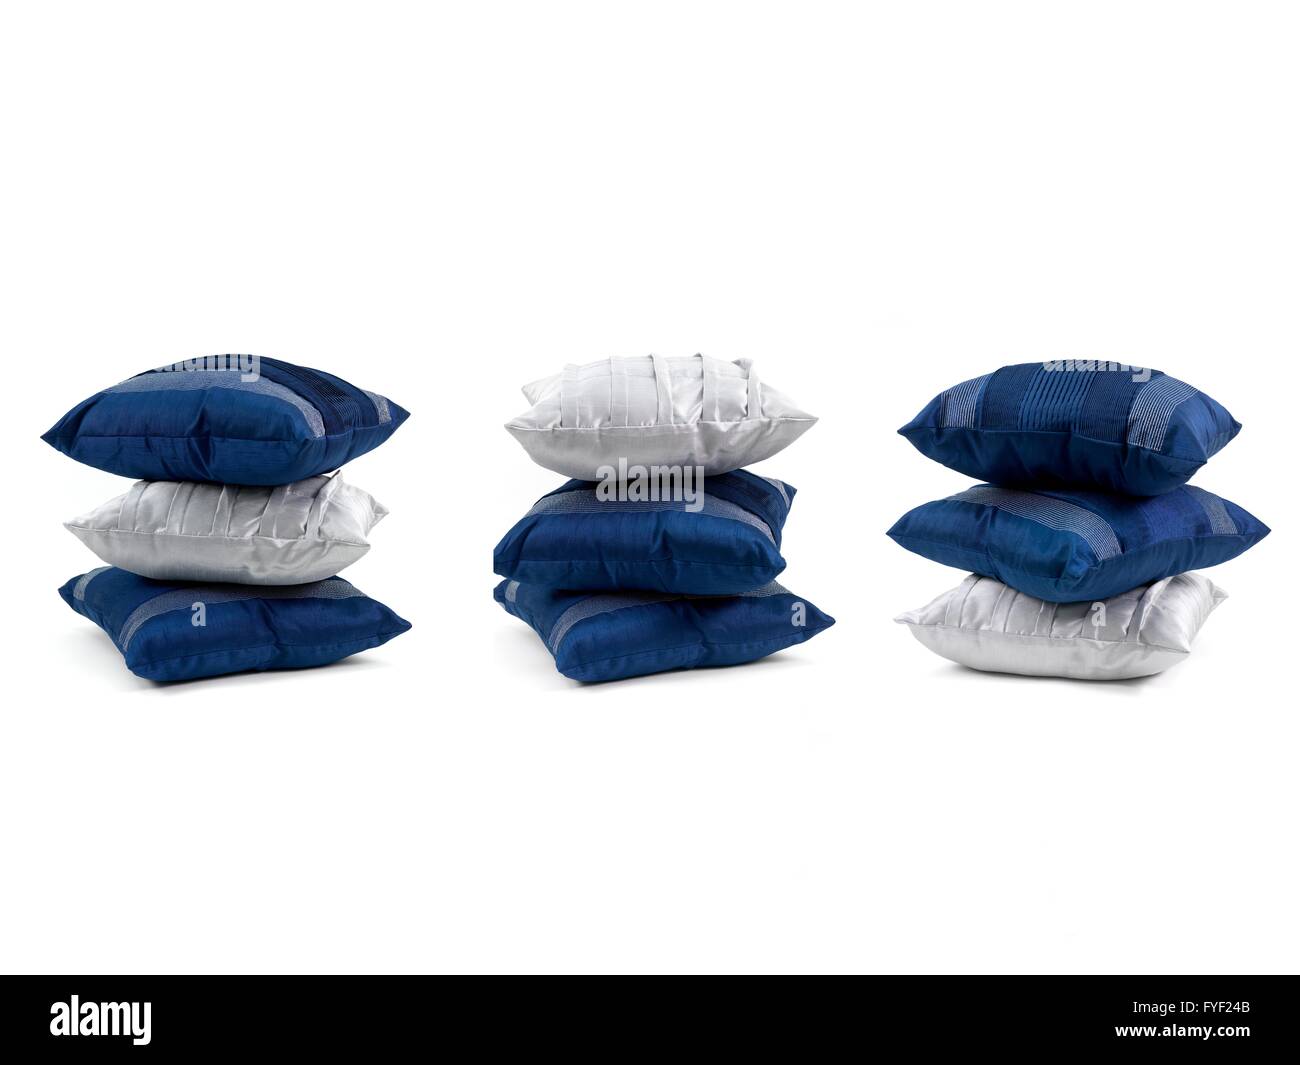 Couch cushions isolated against a white background Stock Photo